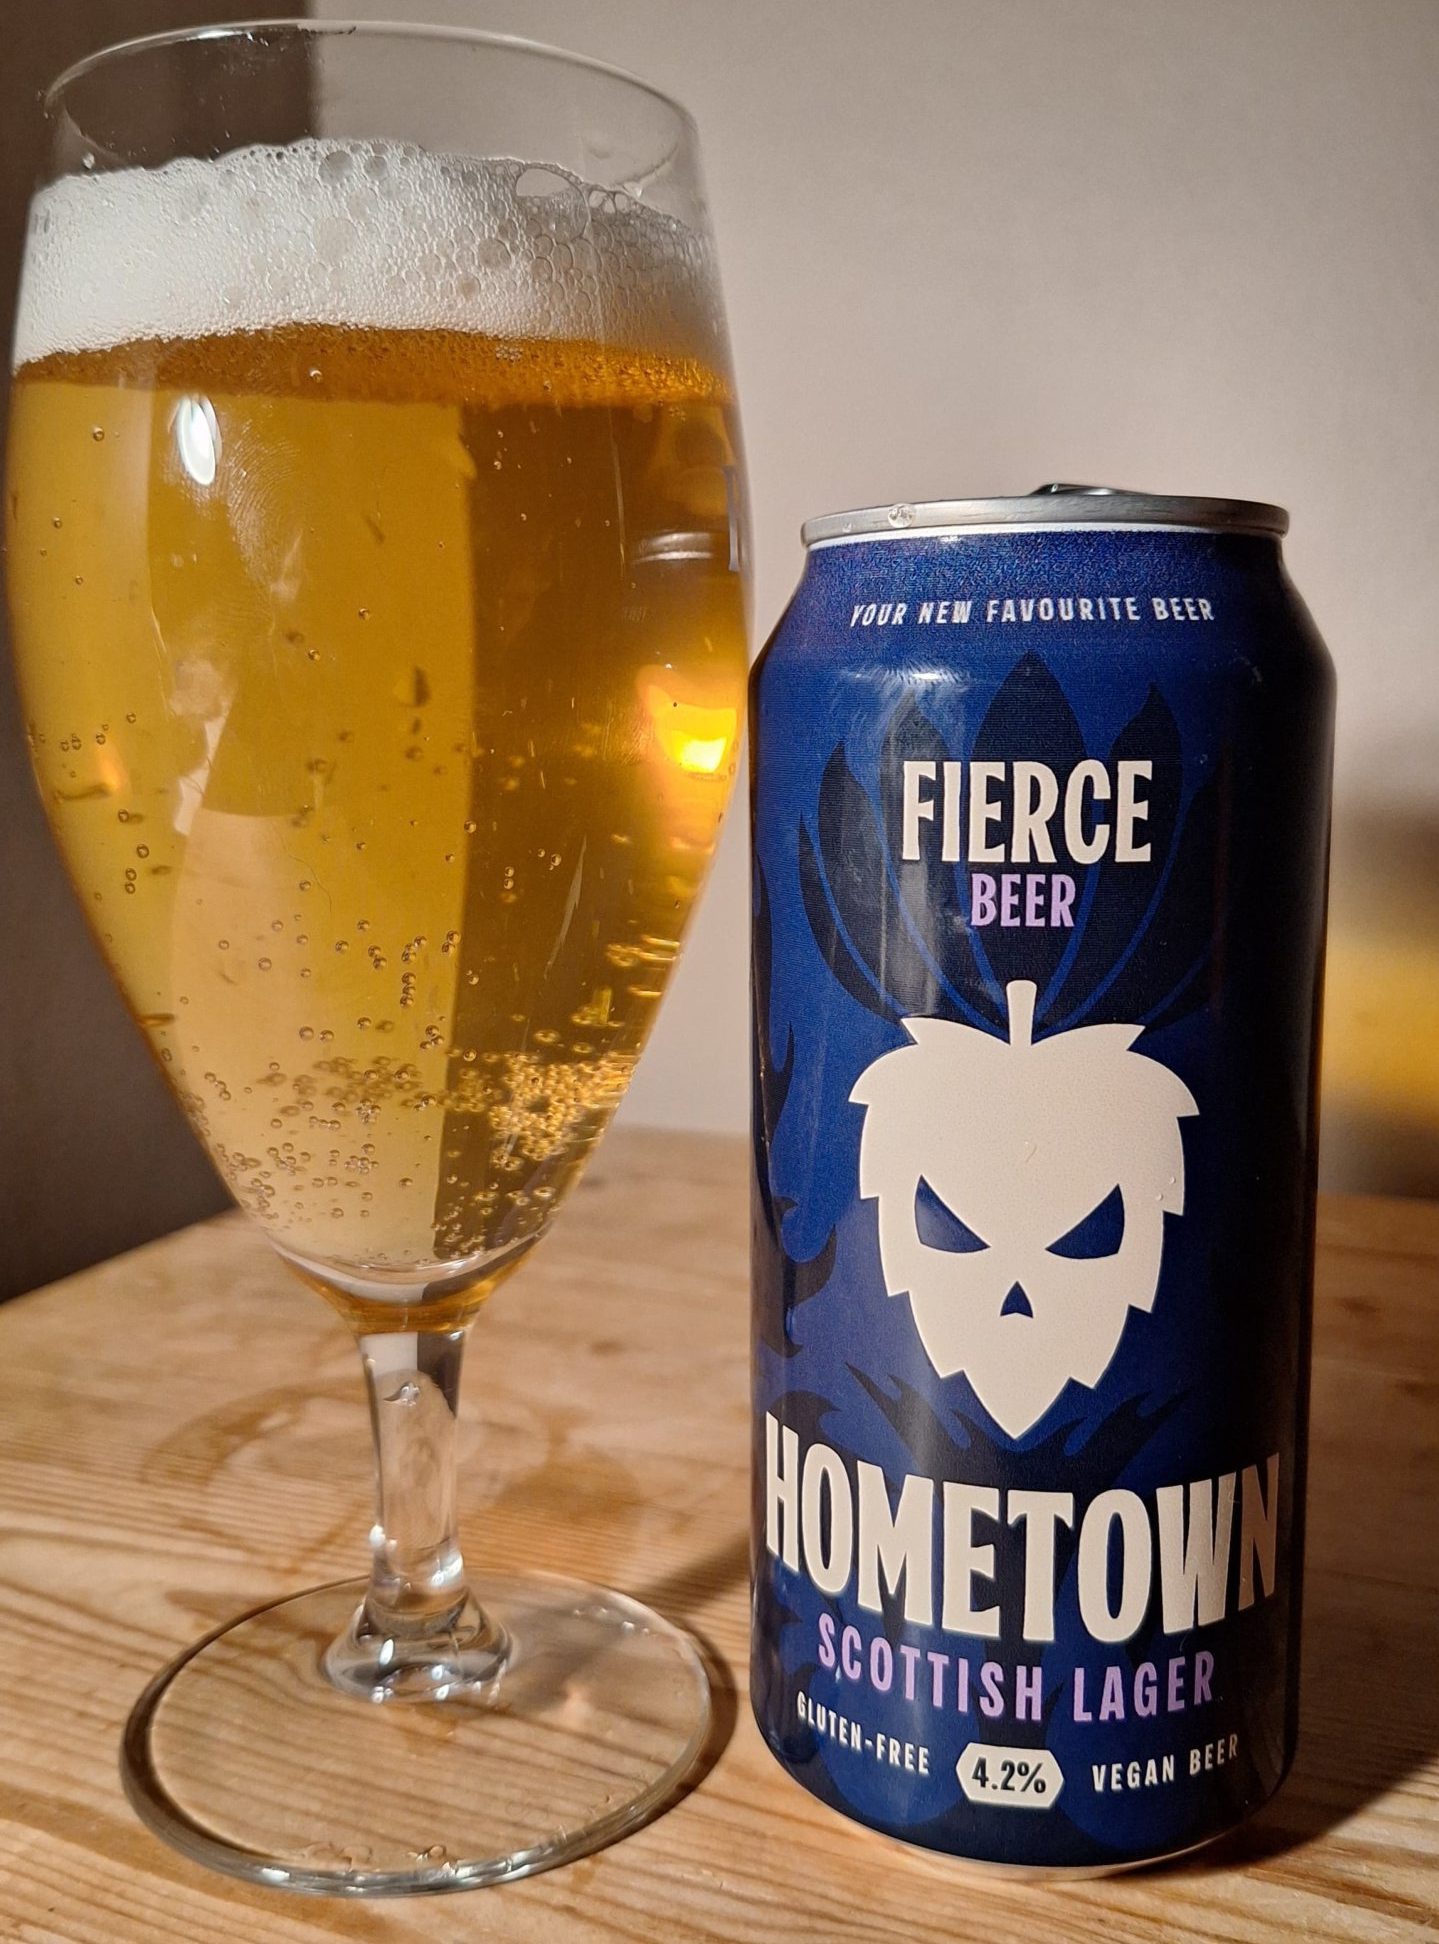 The Hometown lager beer poured into a glass. 